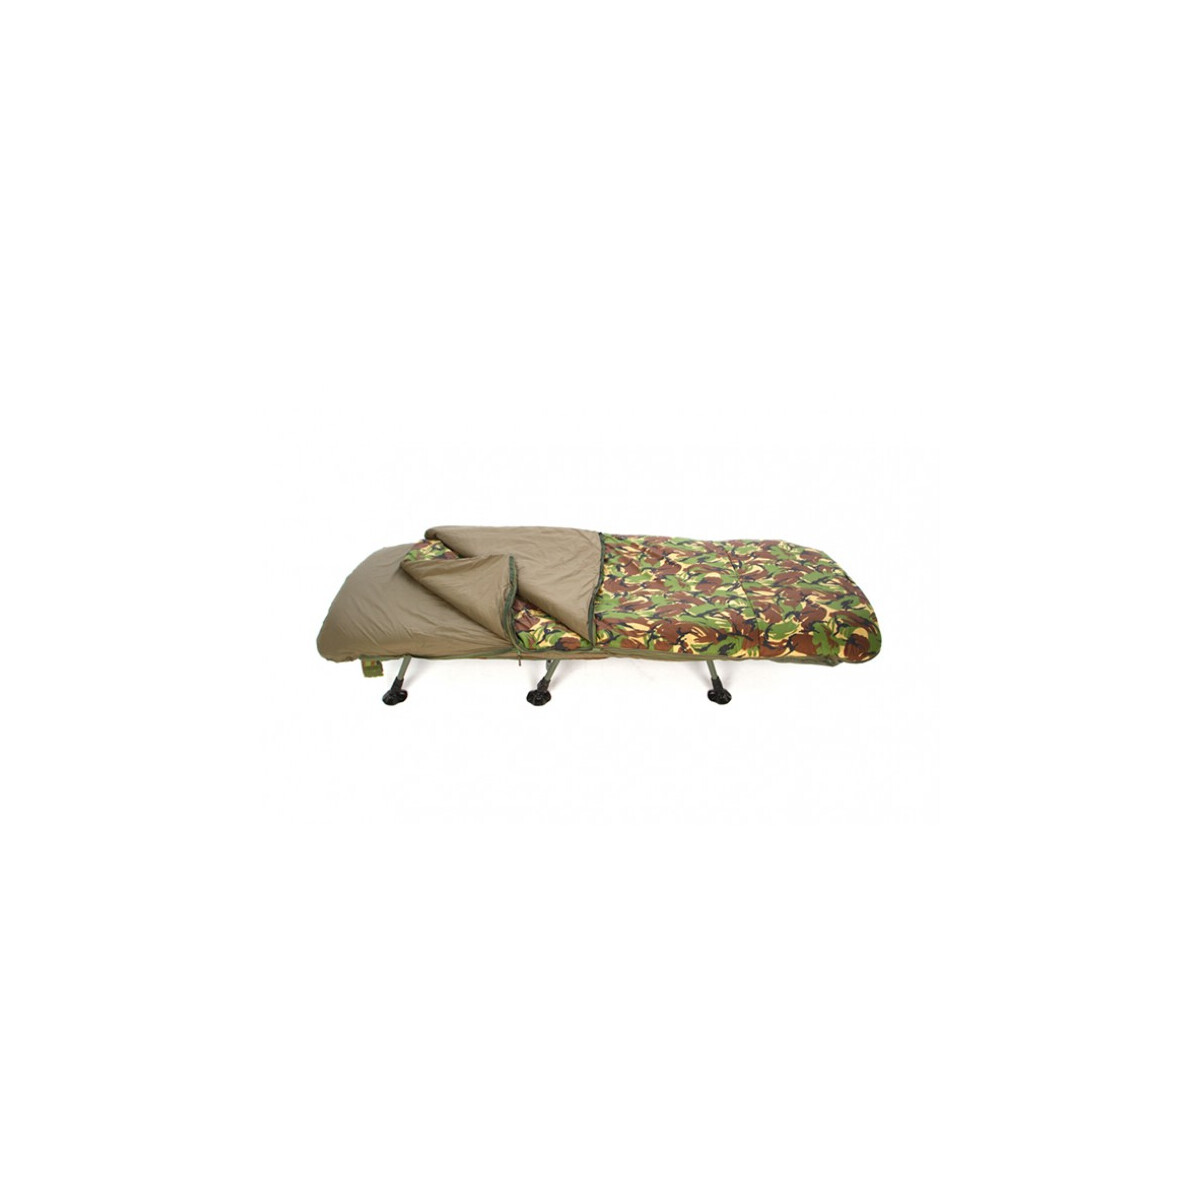 Gardner Tackle Camo DPM Bedchair Cover Carp Fishing BCC 